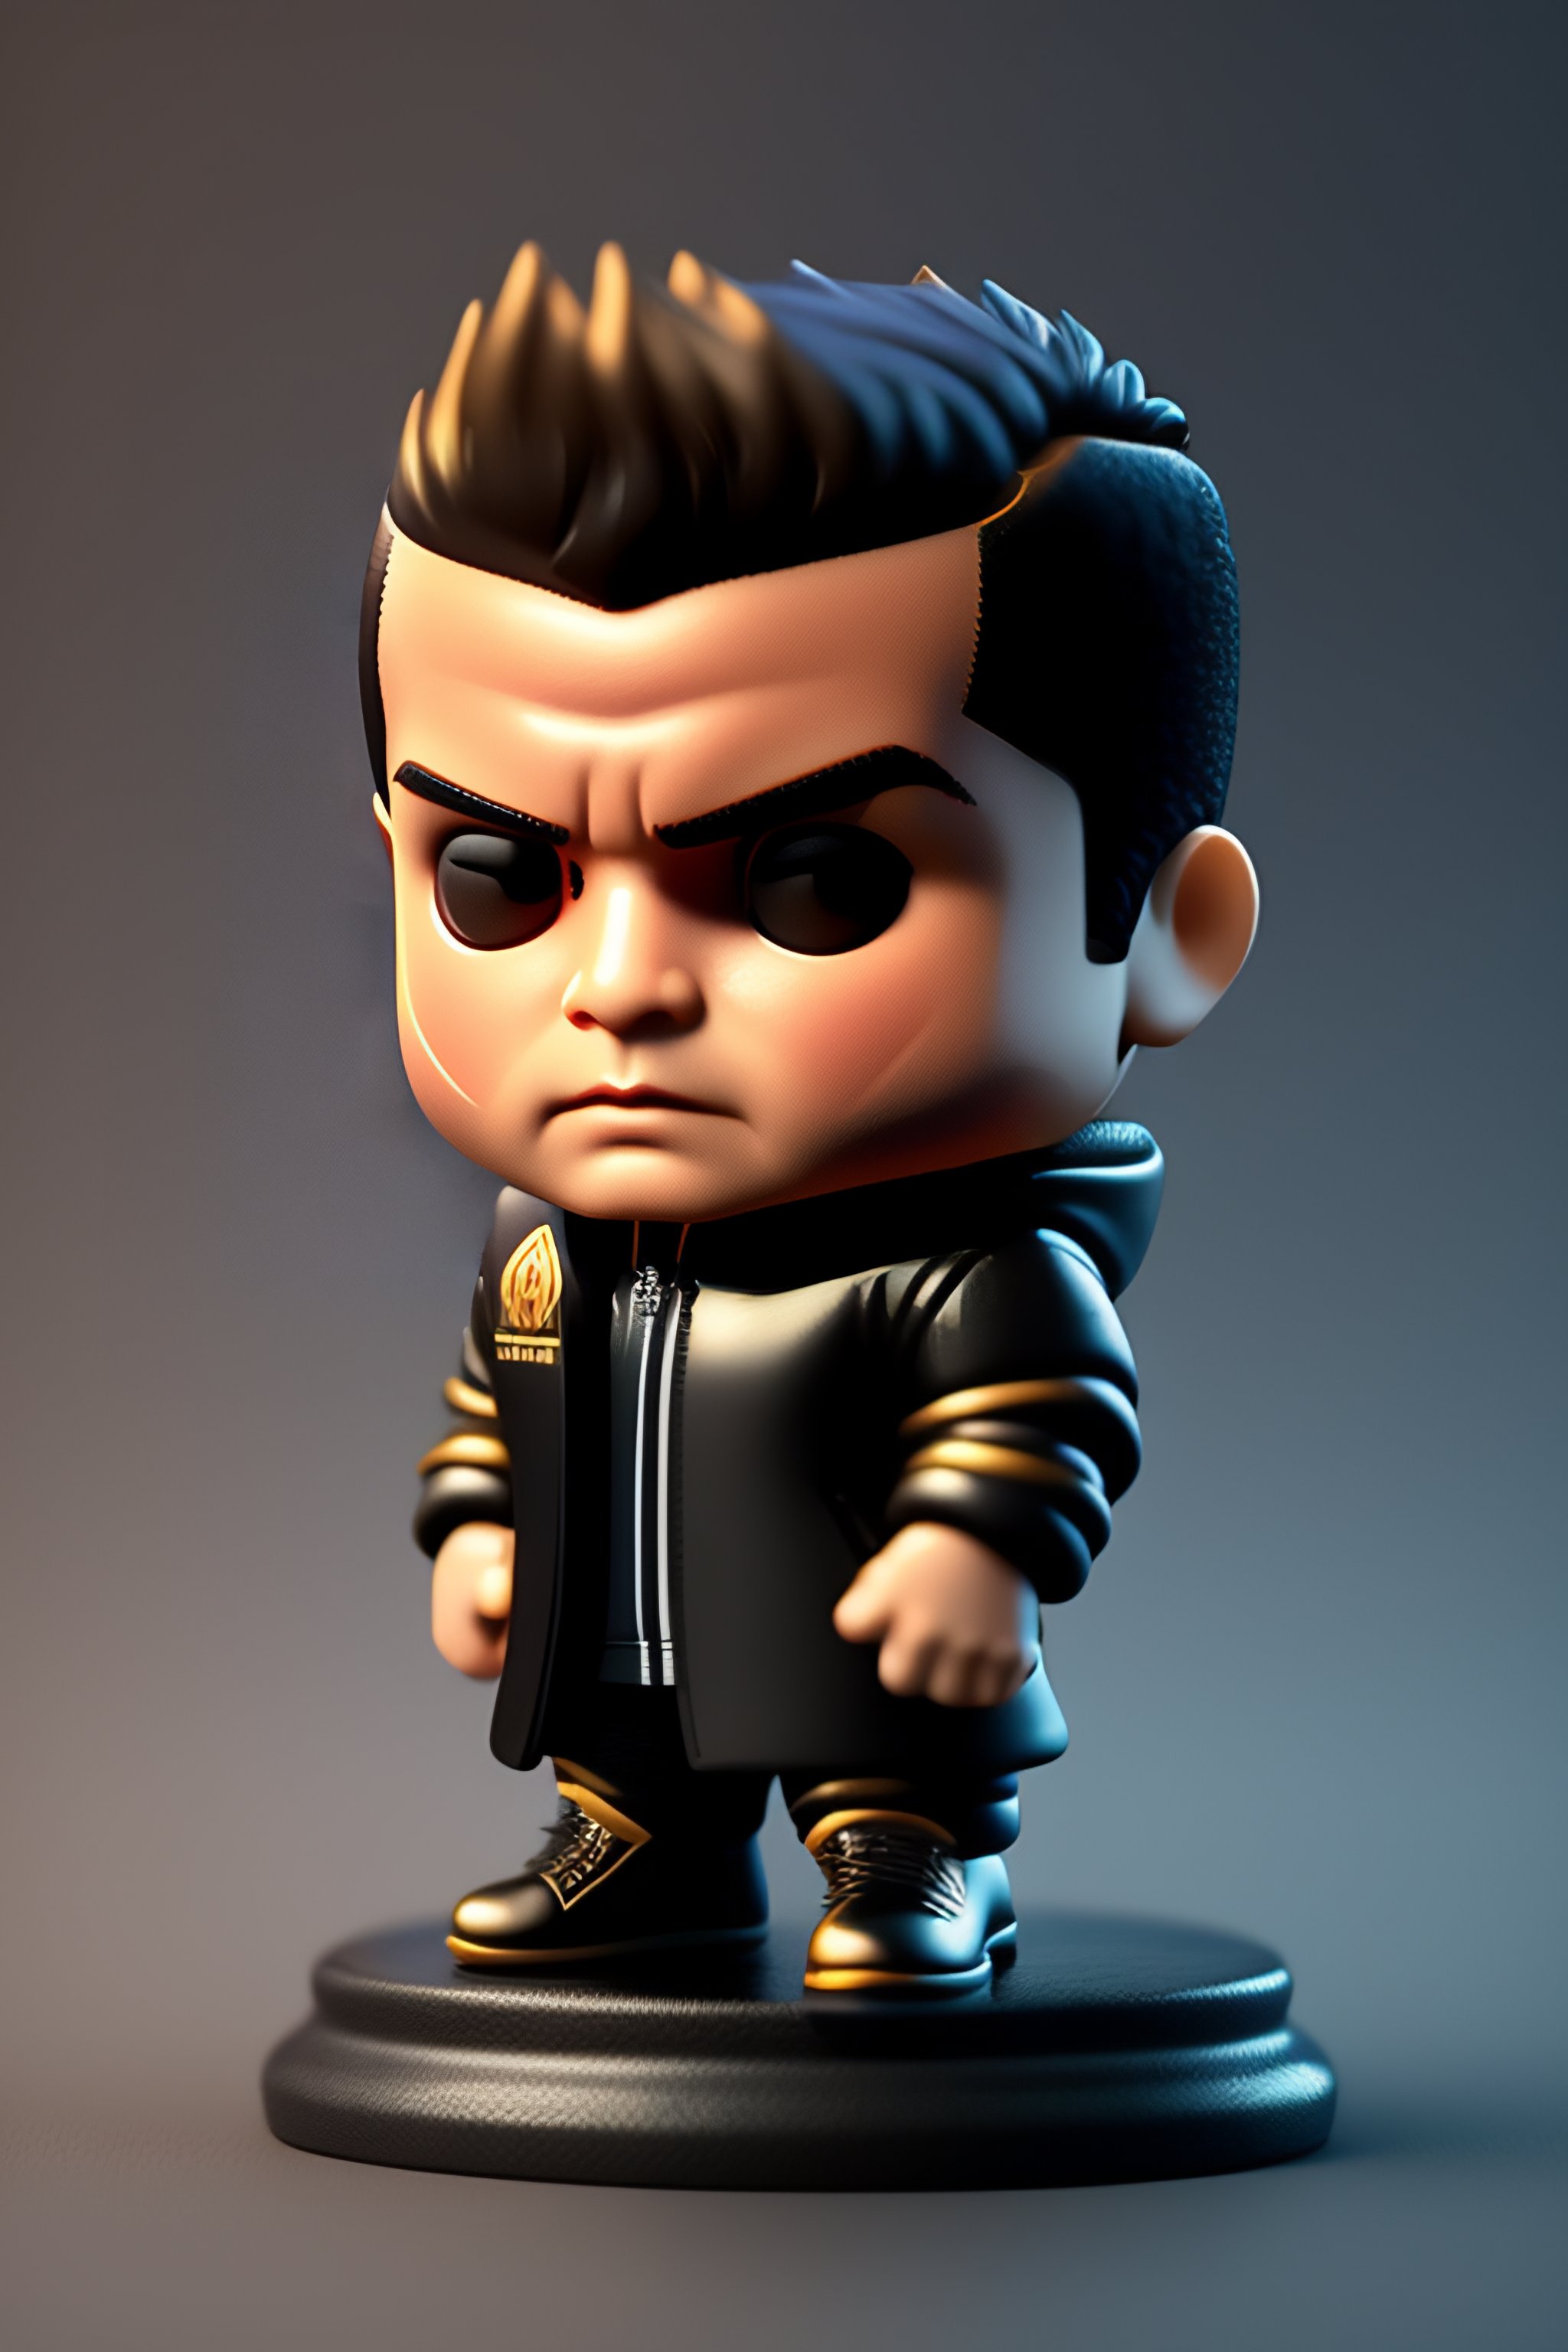 Lexica - Cristiano Ronaldo brutal character in the jacket, 3d render funko  pop